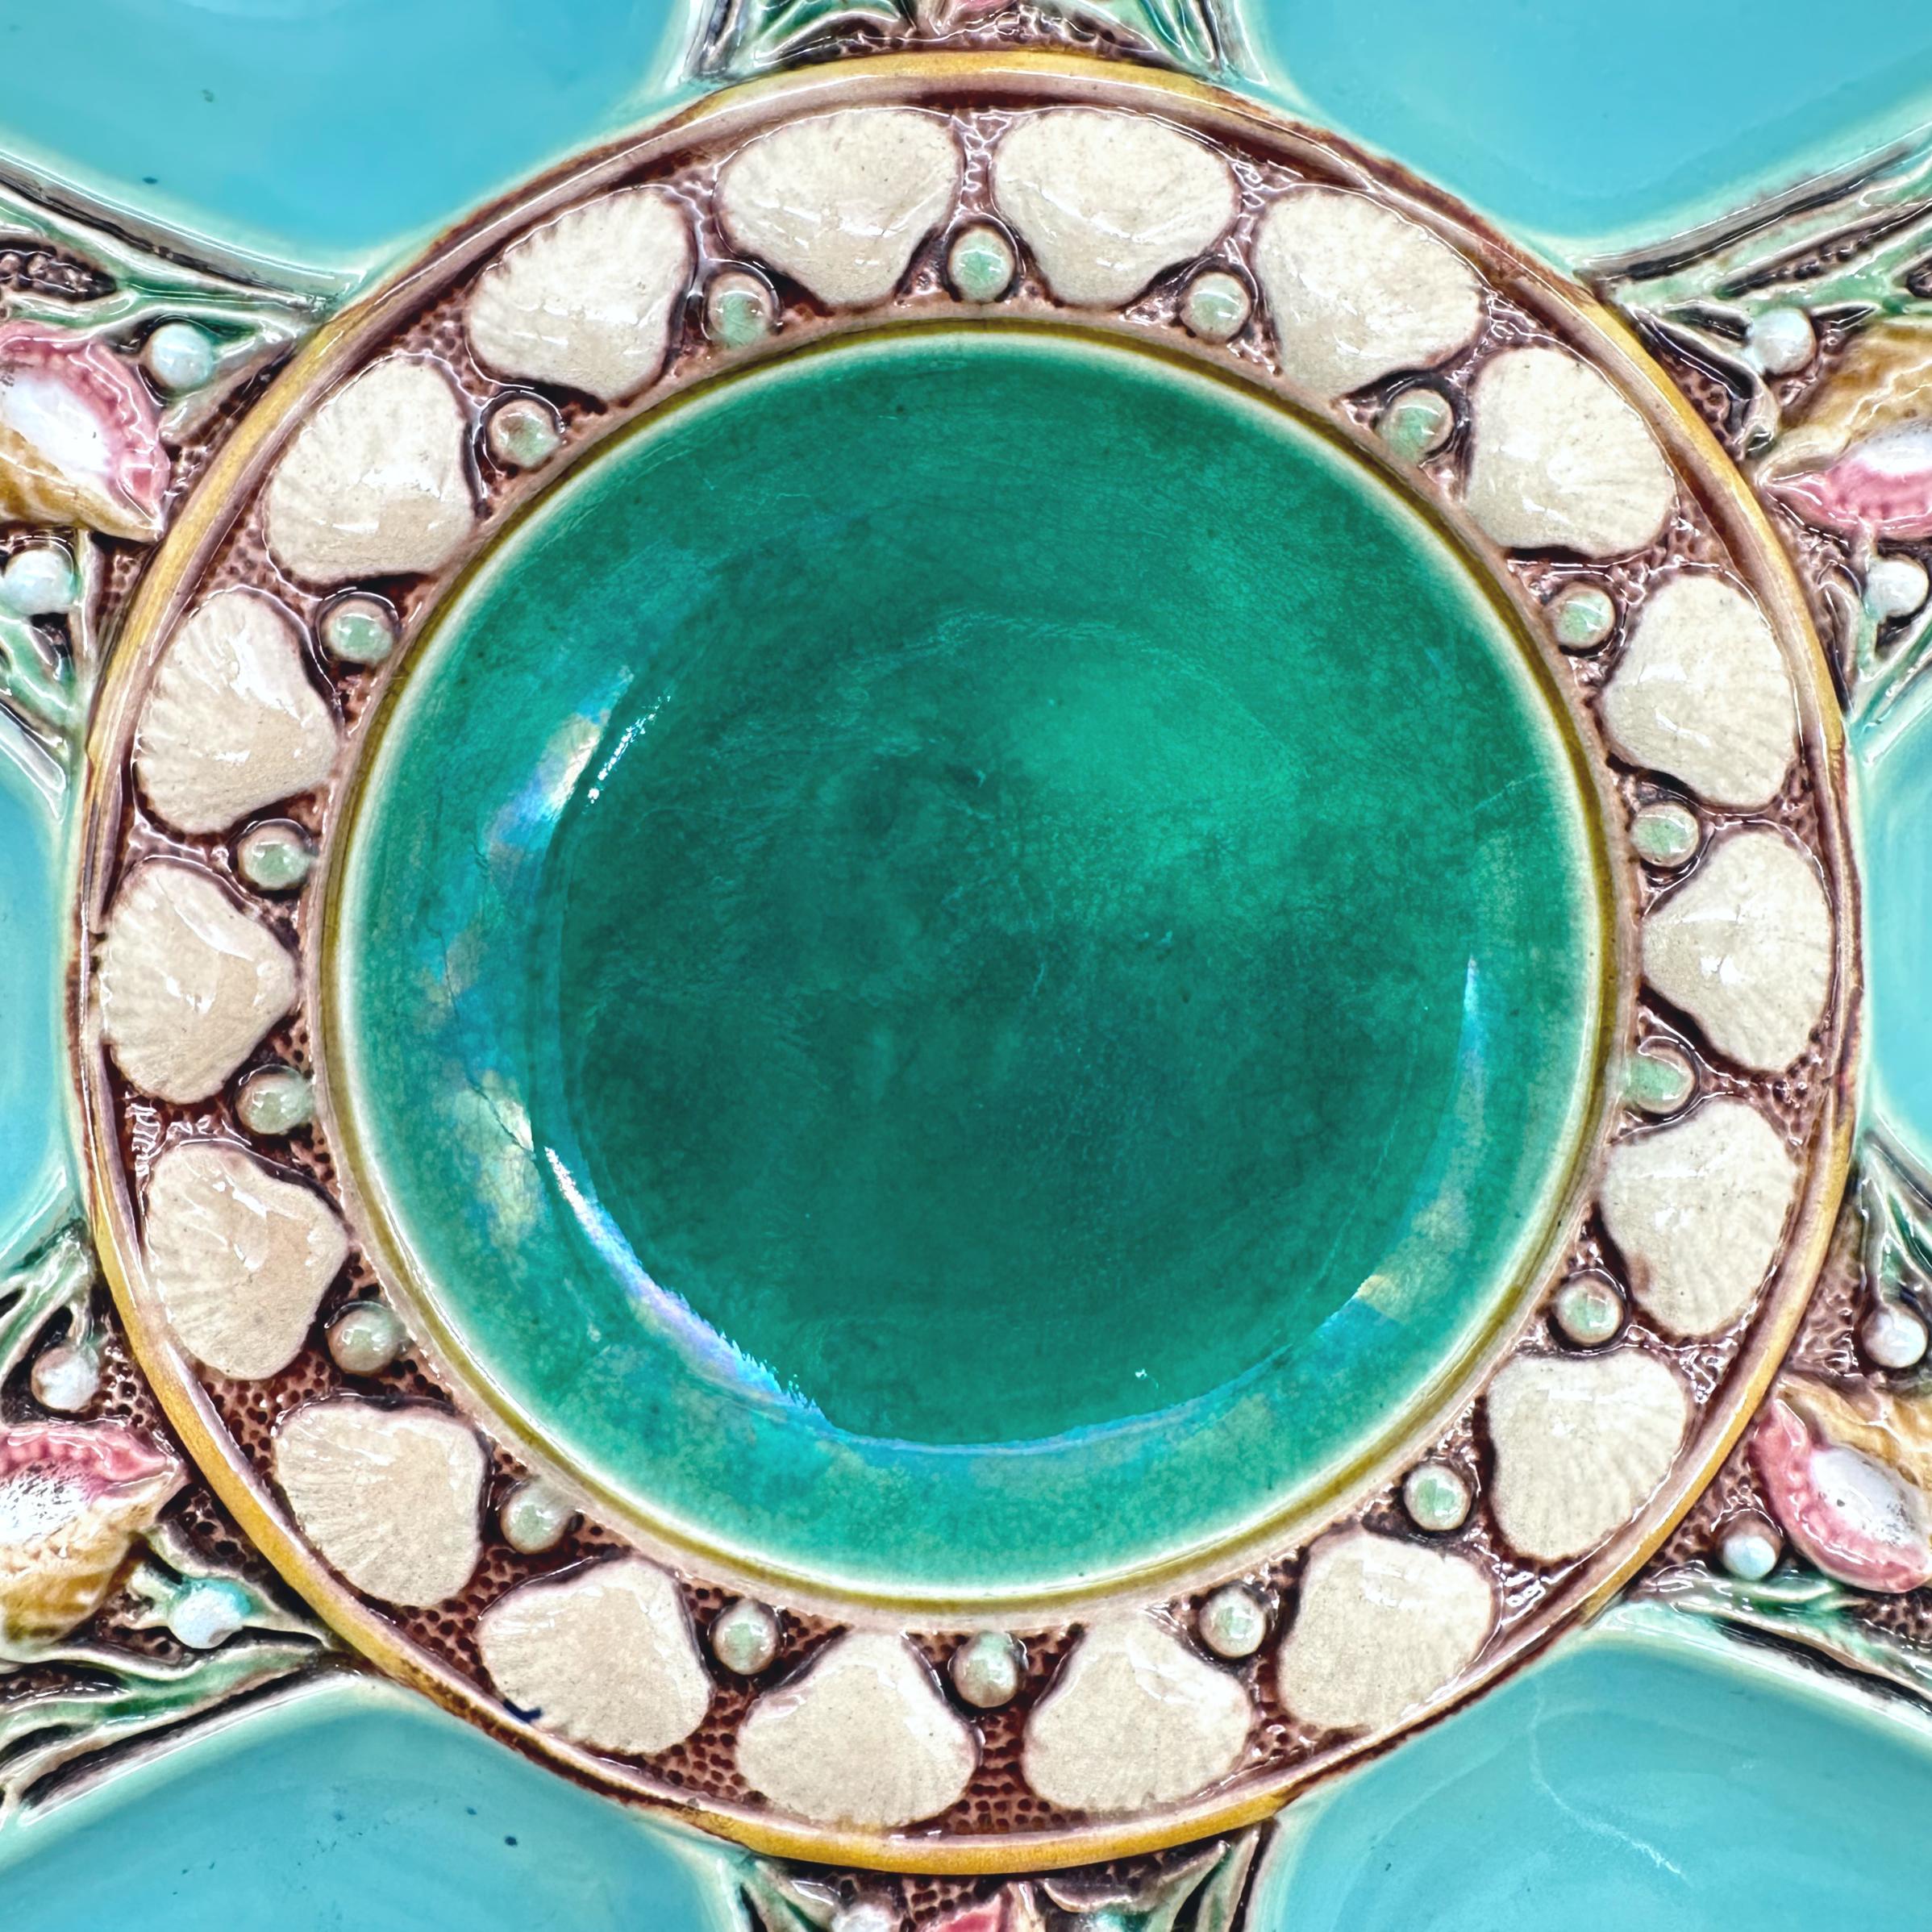 English Minton Majolica Seafoam Green Oyster Plate, Shells and Seaweed, Dated 1875